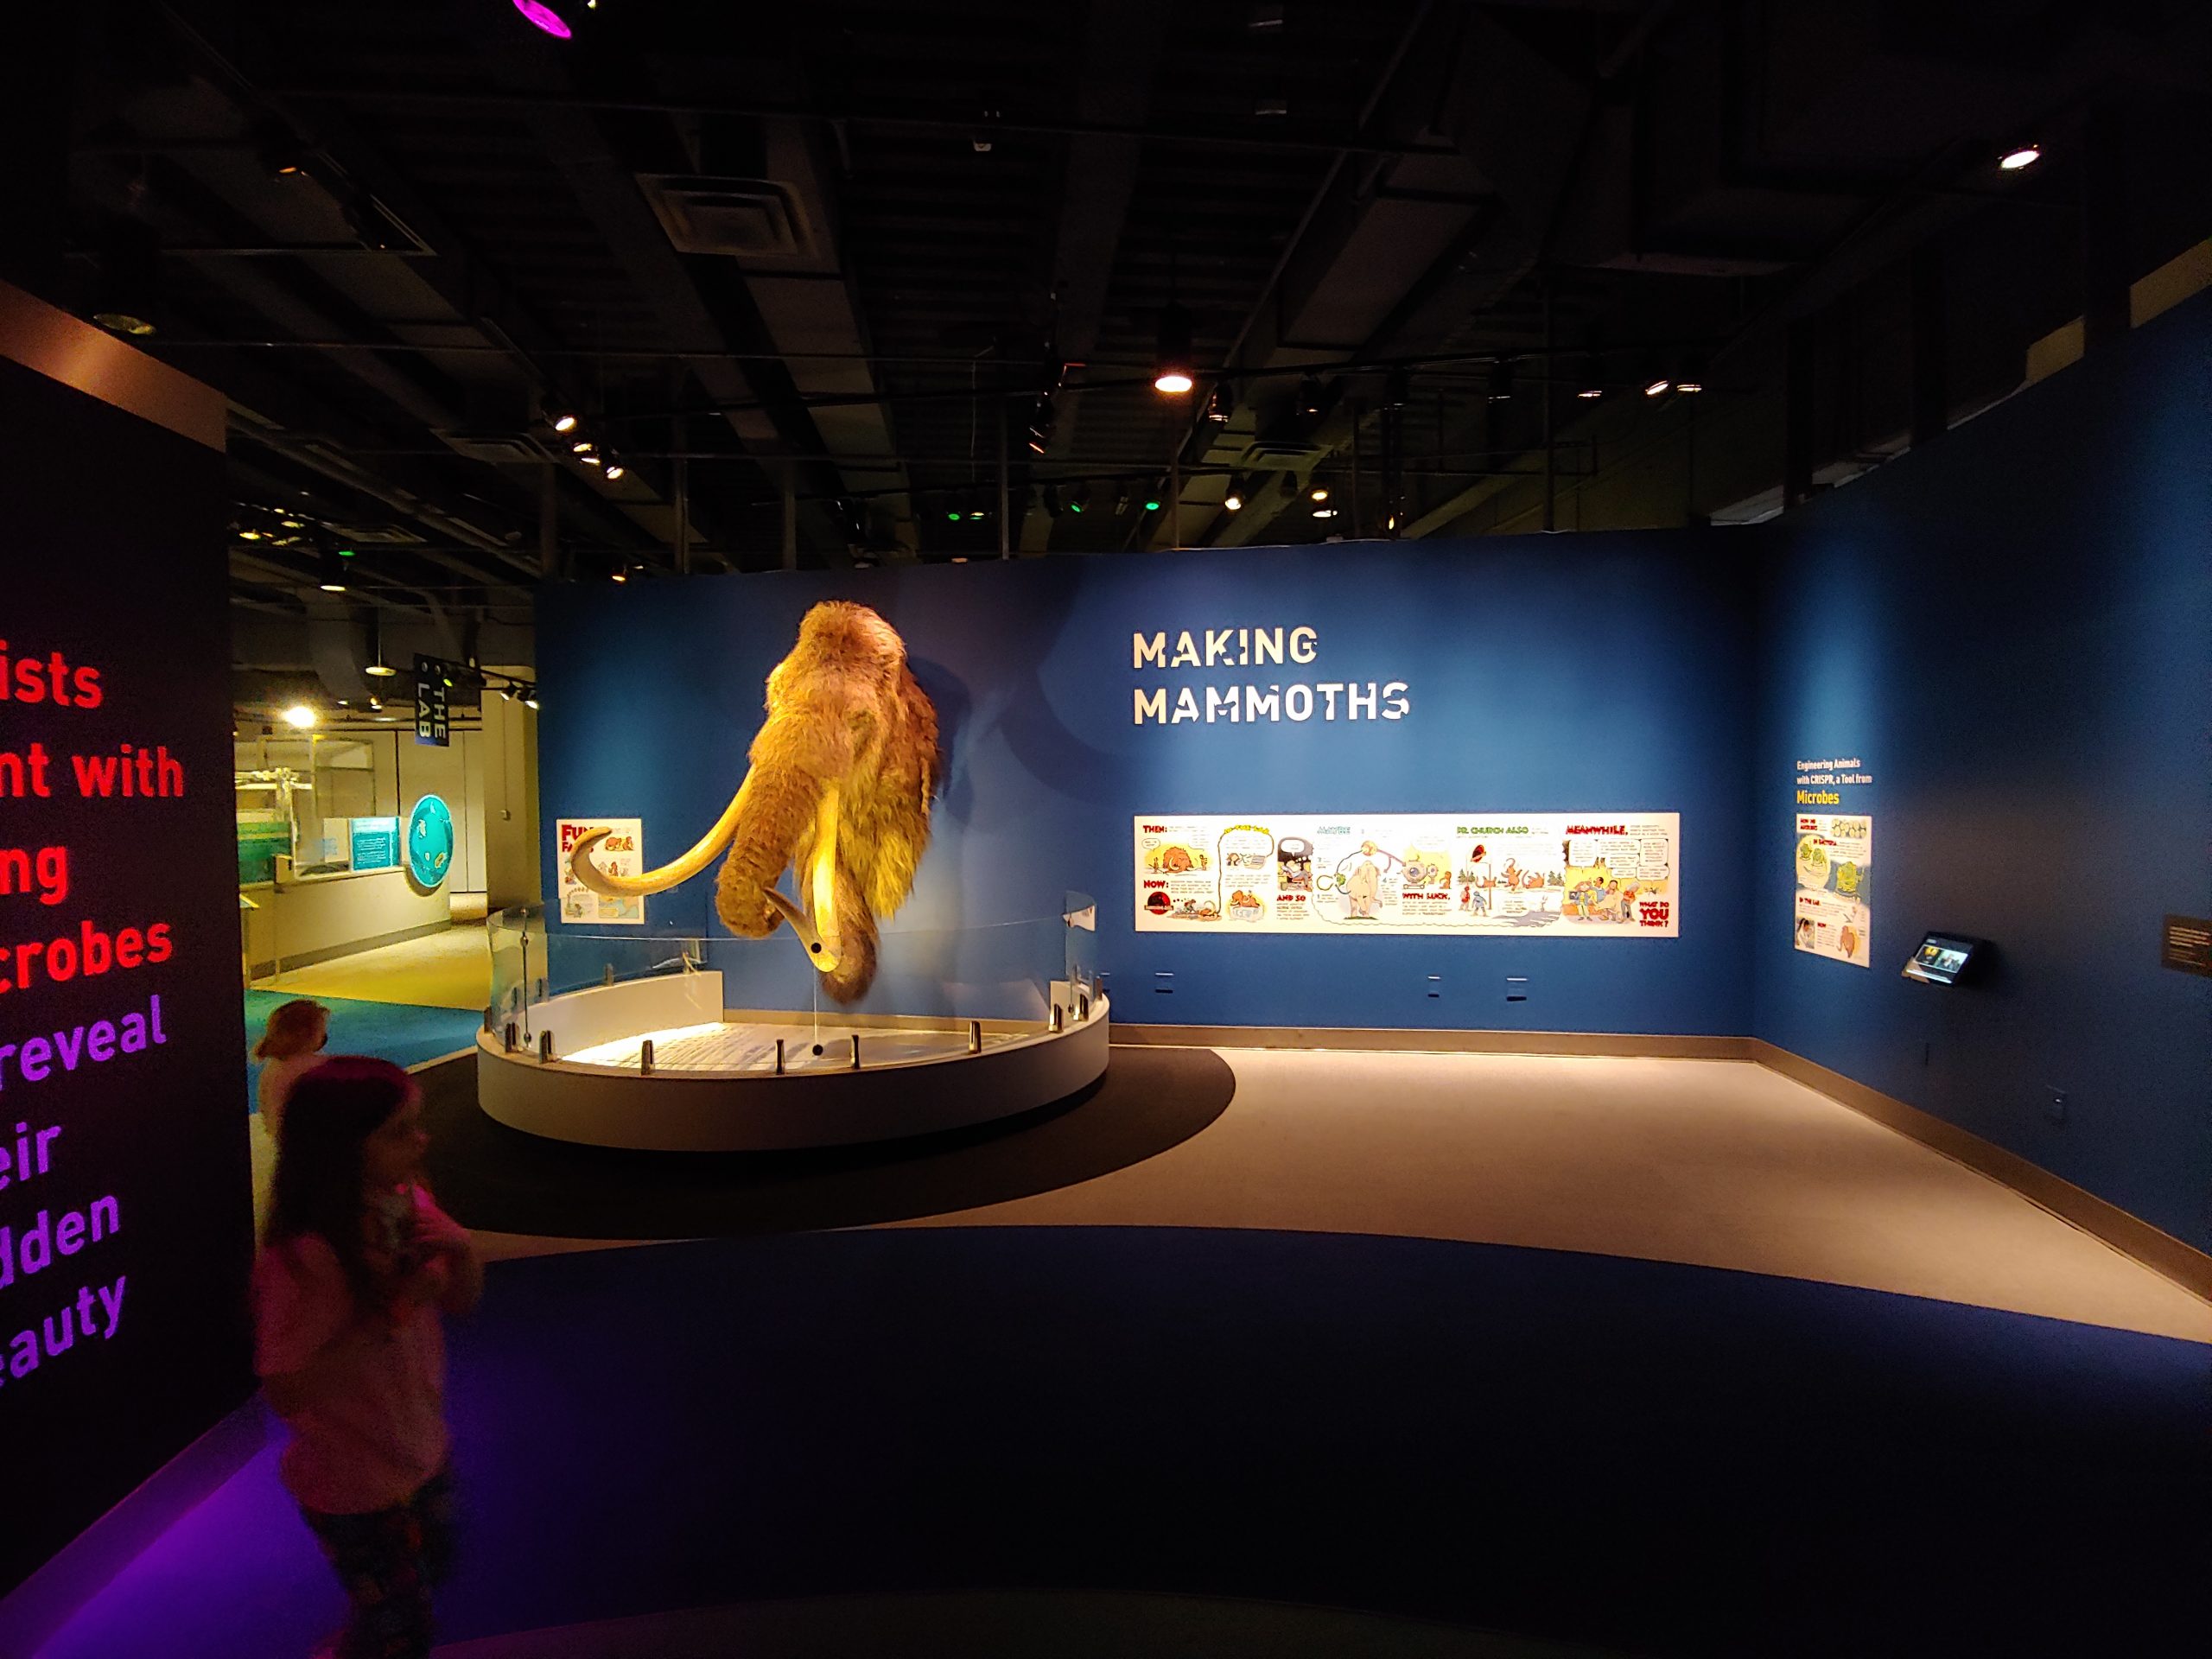 Exhibit featuring Mammoth head emerging from display wall. Walls are deep blue with graphics and text